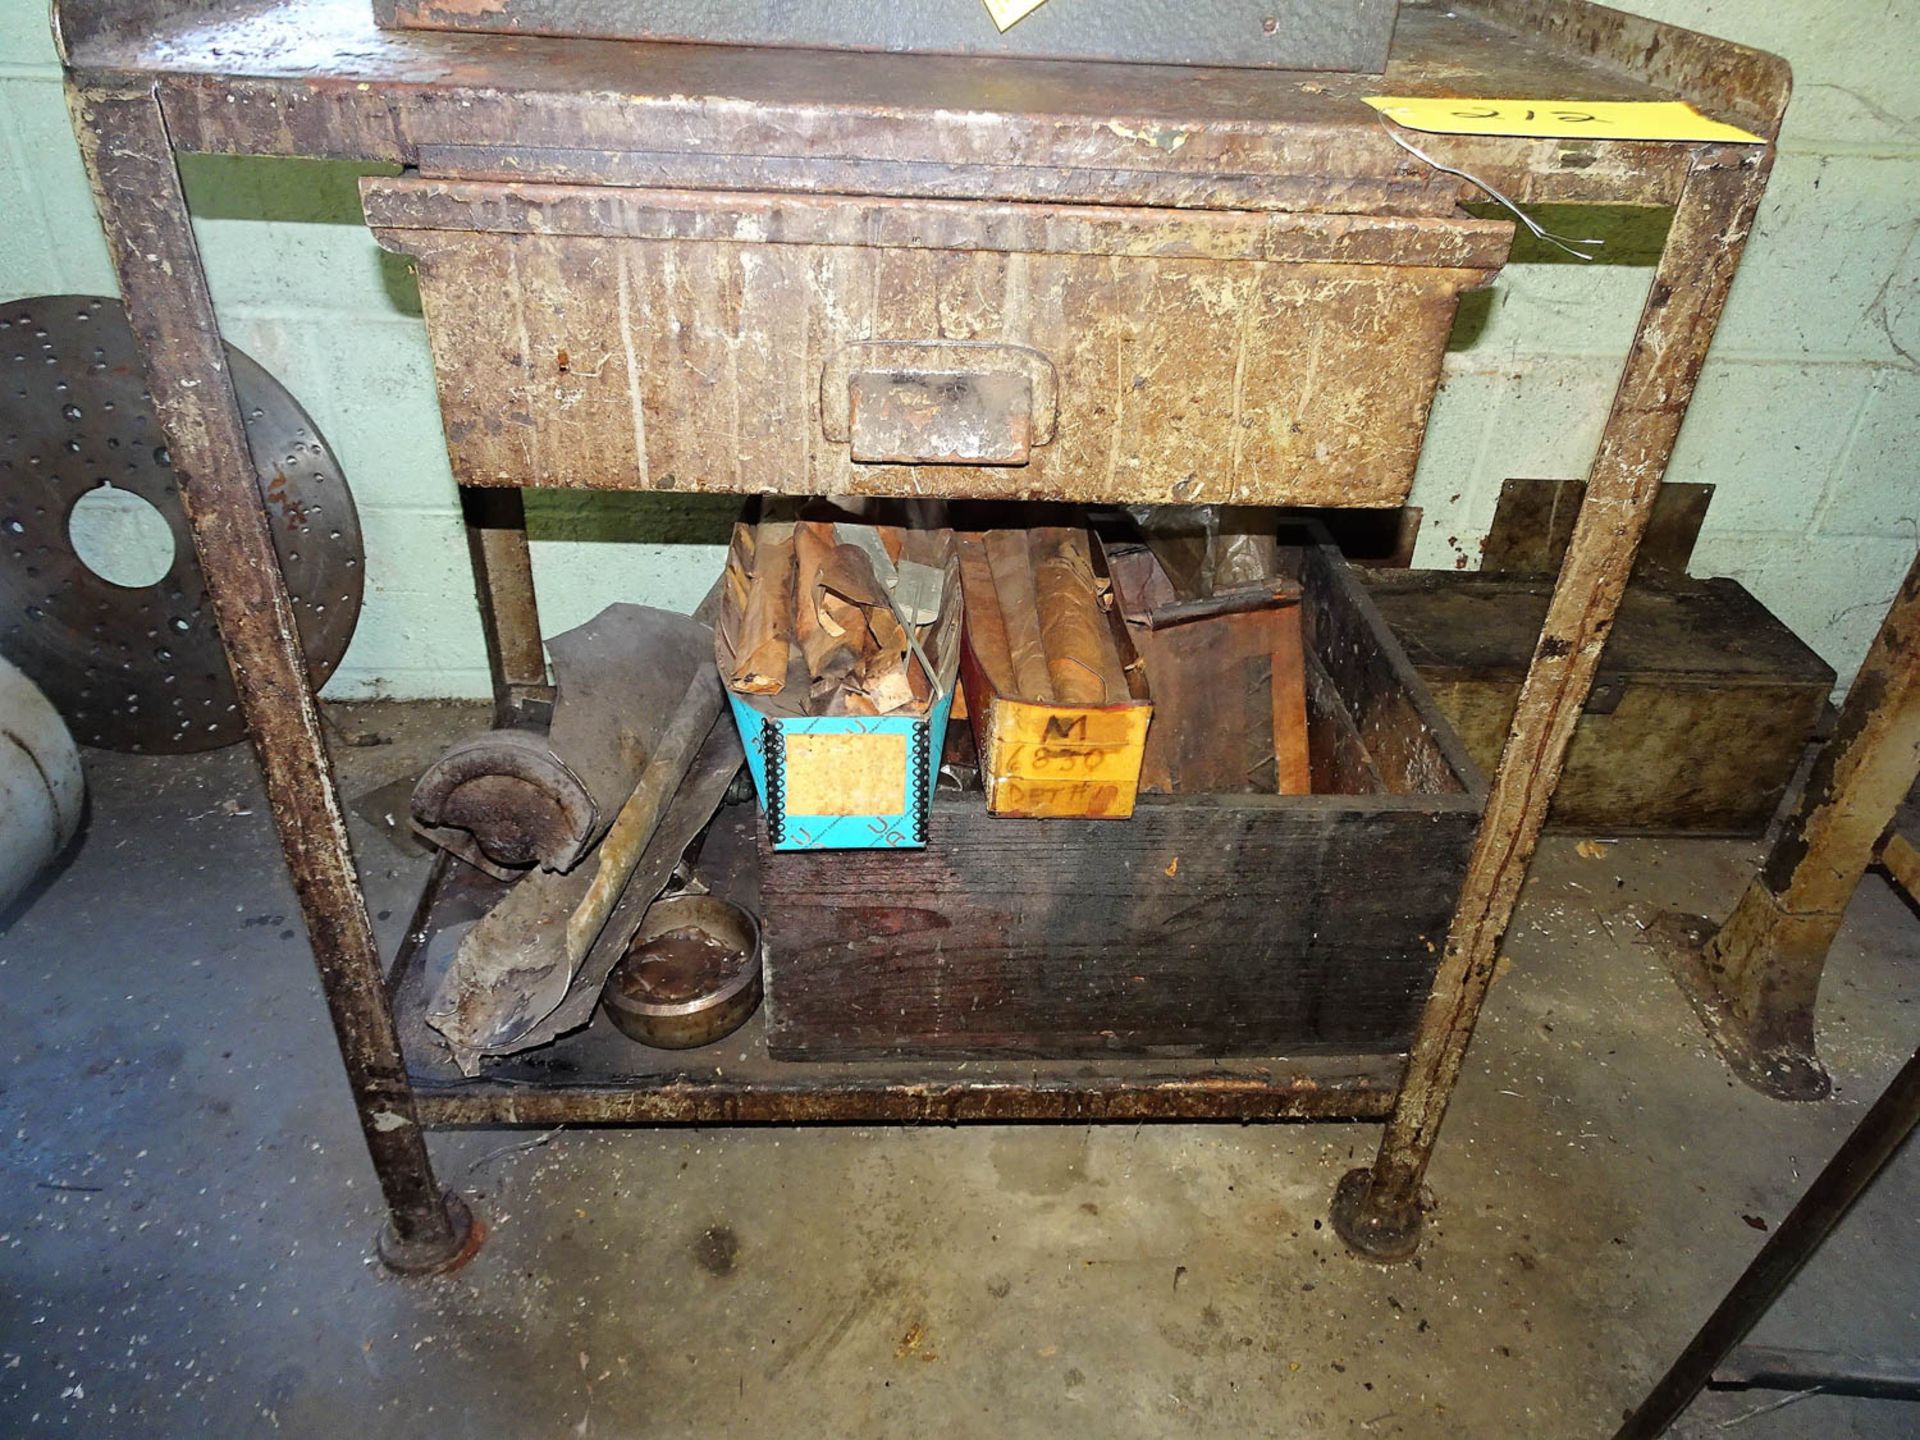 (3) SMALL PARTS BINS, (1) WORK BENCH WITH DRAWERS, (1) WORK BENCH WITH STEEL TOP AND STEEL LEGS, AND